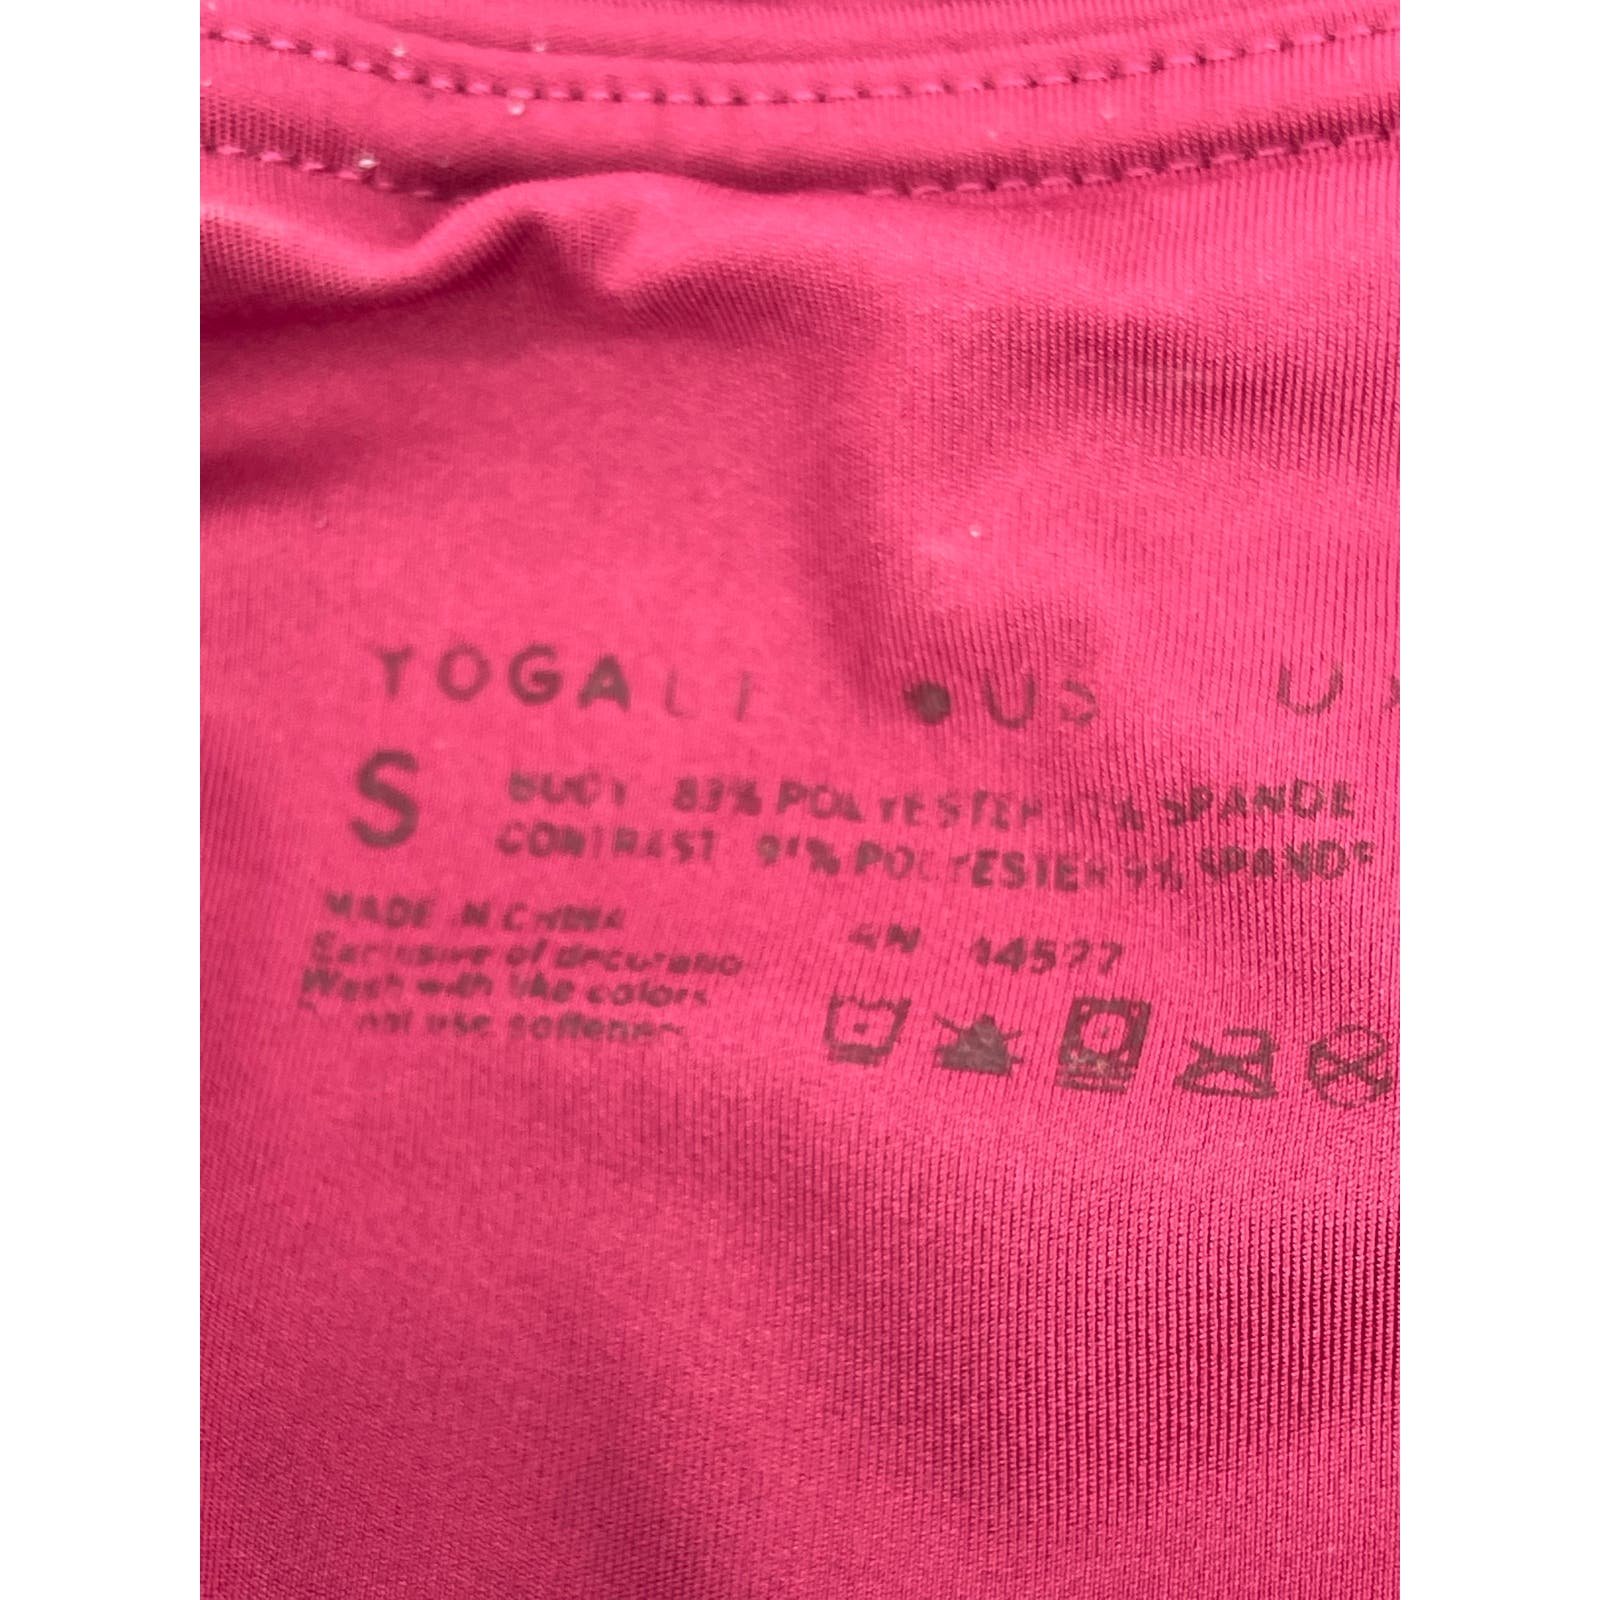 Nice Yogalicious Pink Athletic Fitted Leggings Women´s Size Small pARzt0oIY just buy it